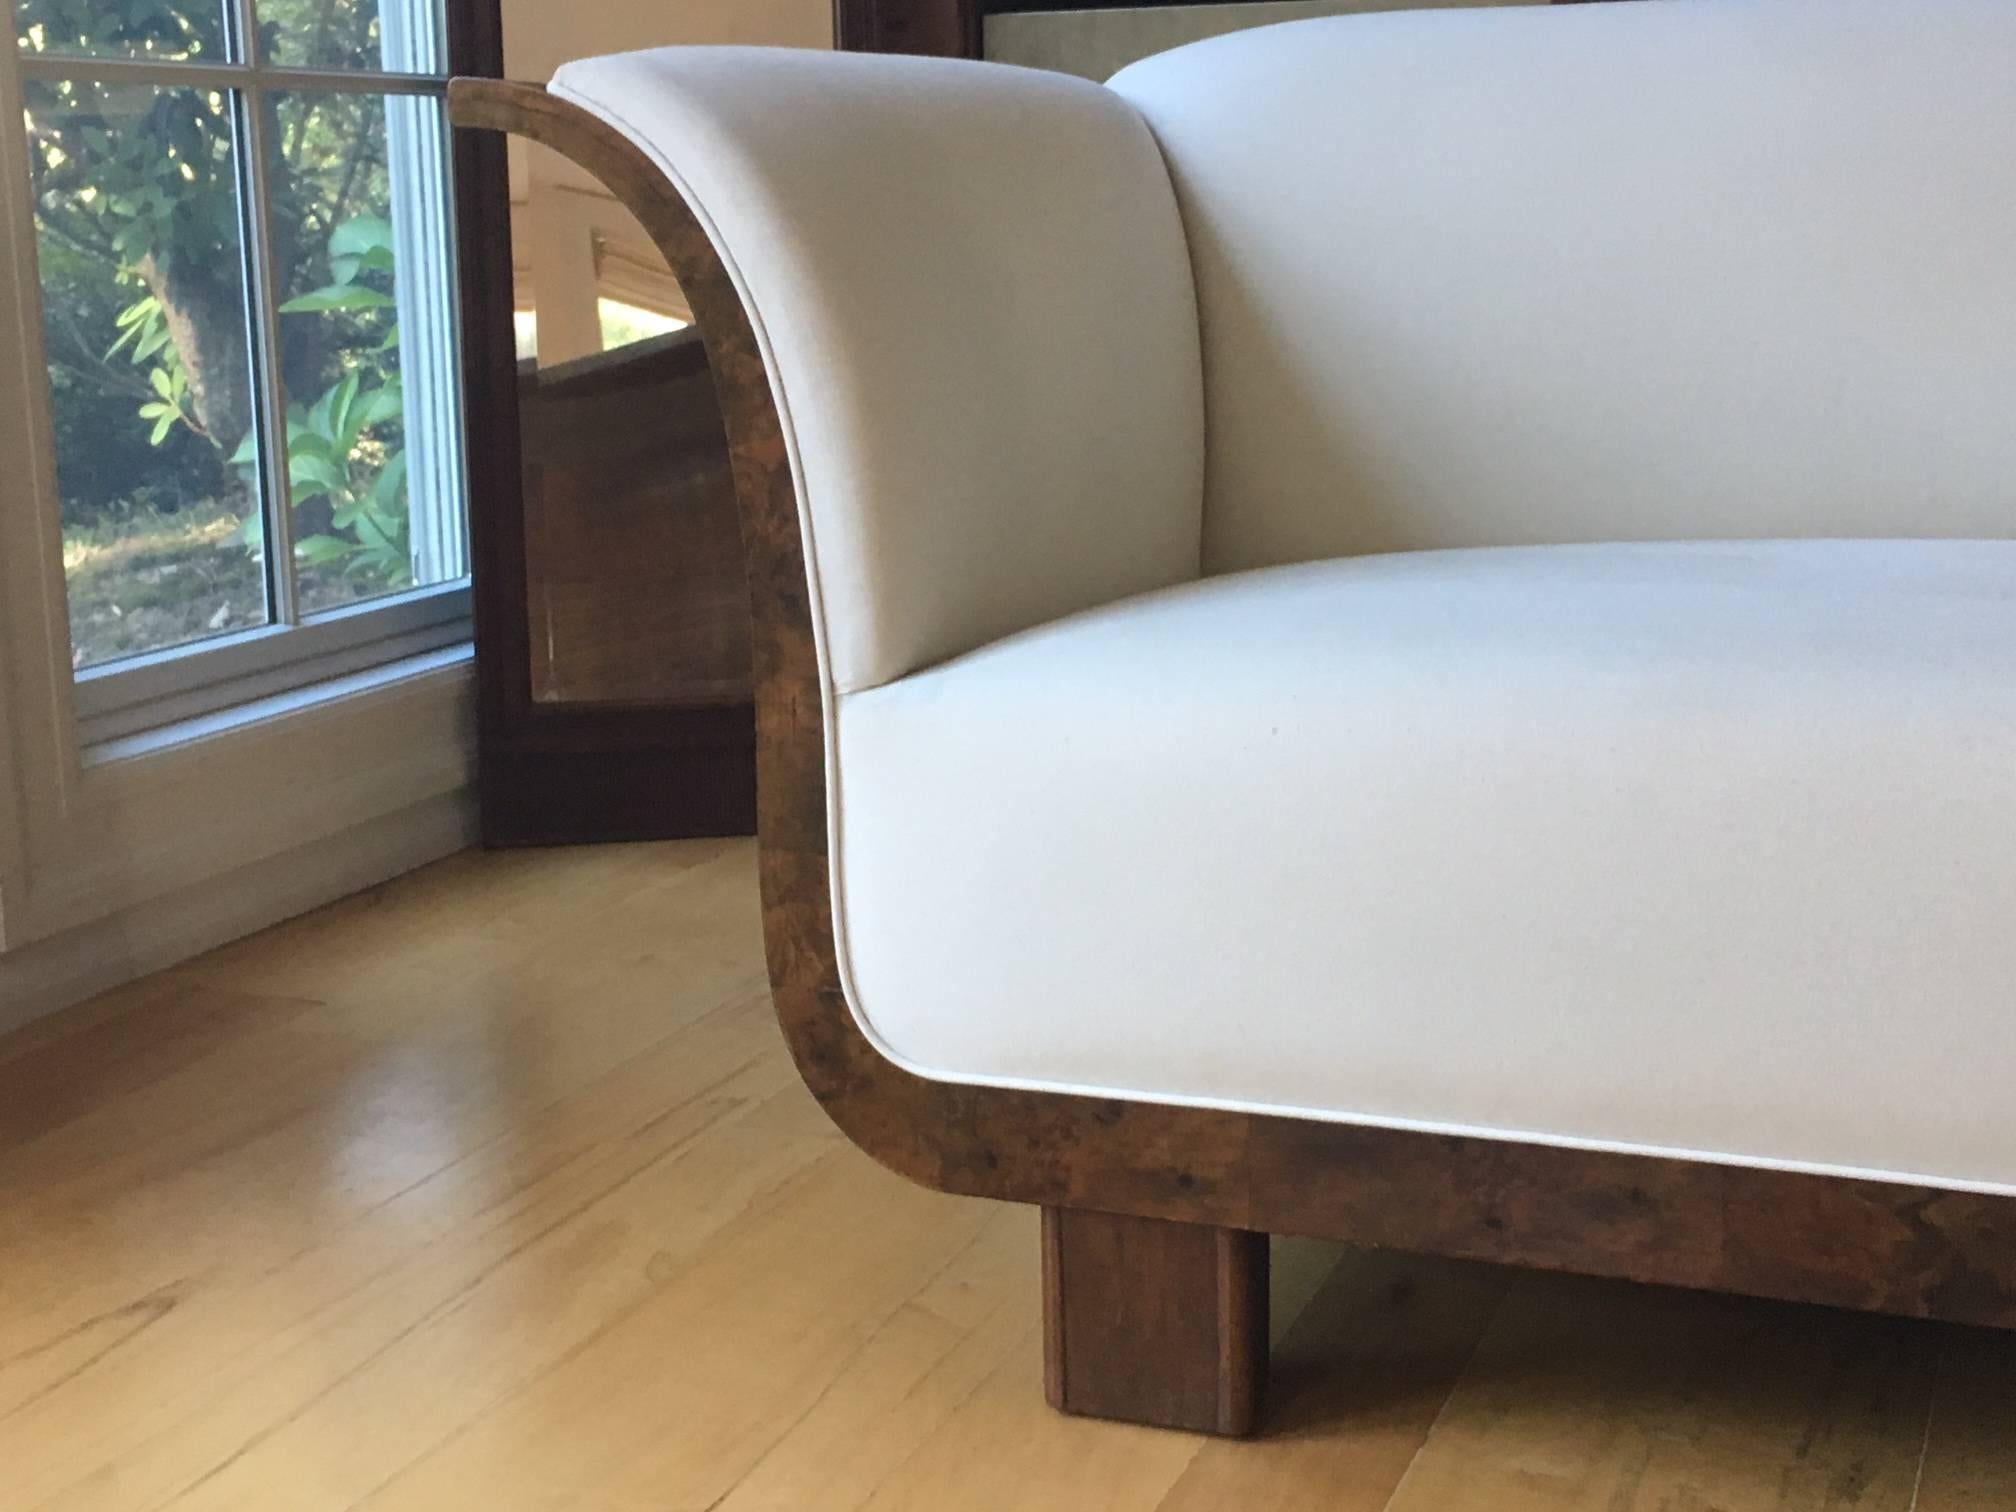 Stunning Danish Art Deco sofa. Burled and French walnut, circa 1930.

This beautifully designed sofa, with its fabulous curves, was originally meant for installation directly against a wall with an unfinished back. We wished to honor the original